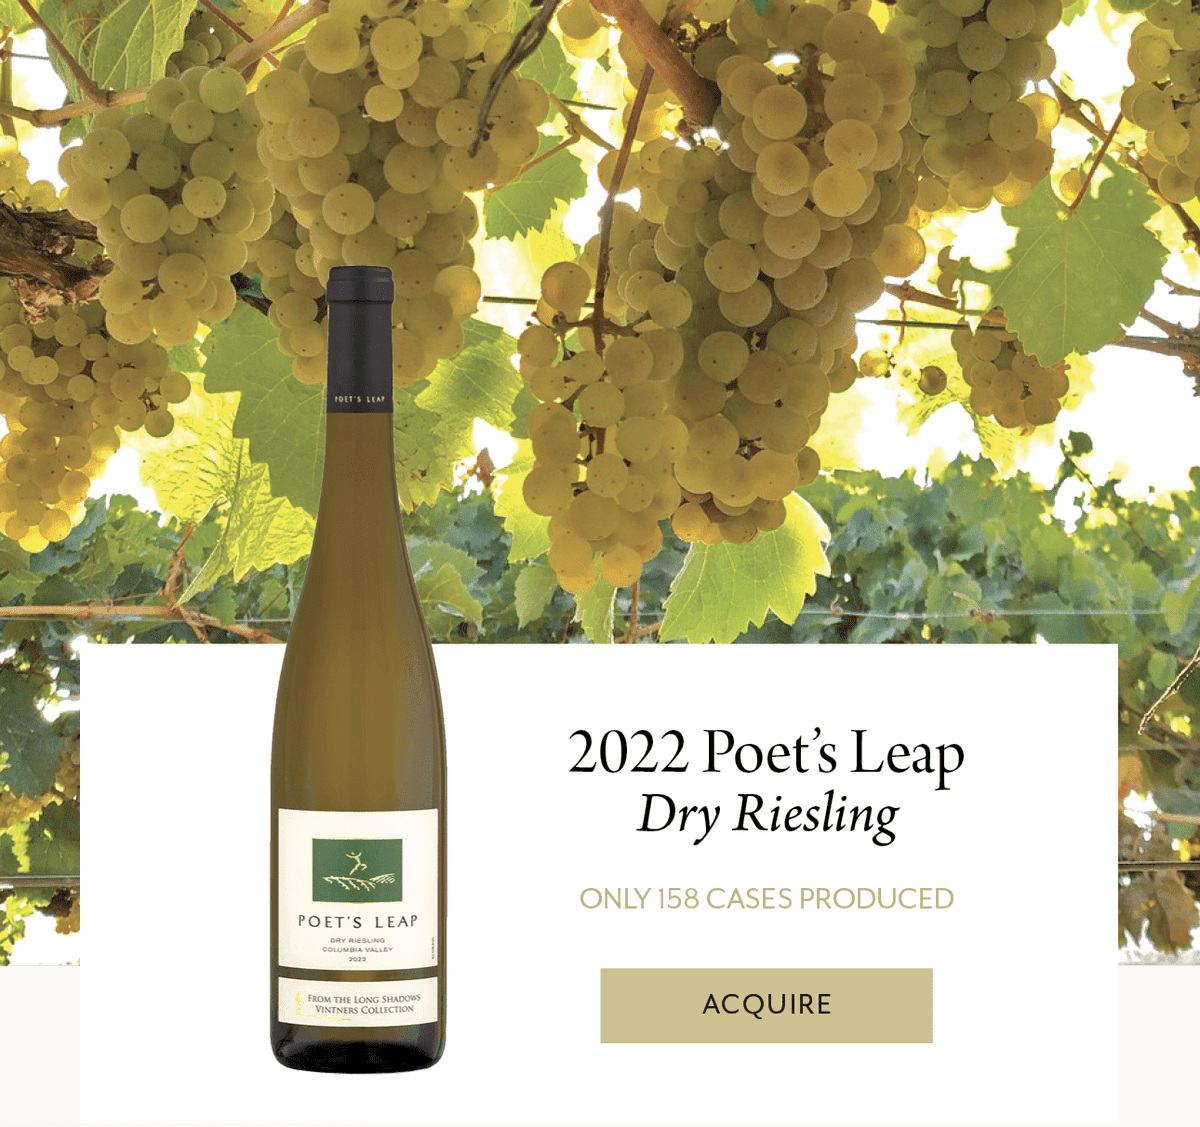 Our 2022 Poet's Leap Dry Riesling is here! With only 158 cases produced, this wine is expected to sell out quickly. Order now: bit.ly/3VbCtiP